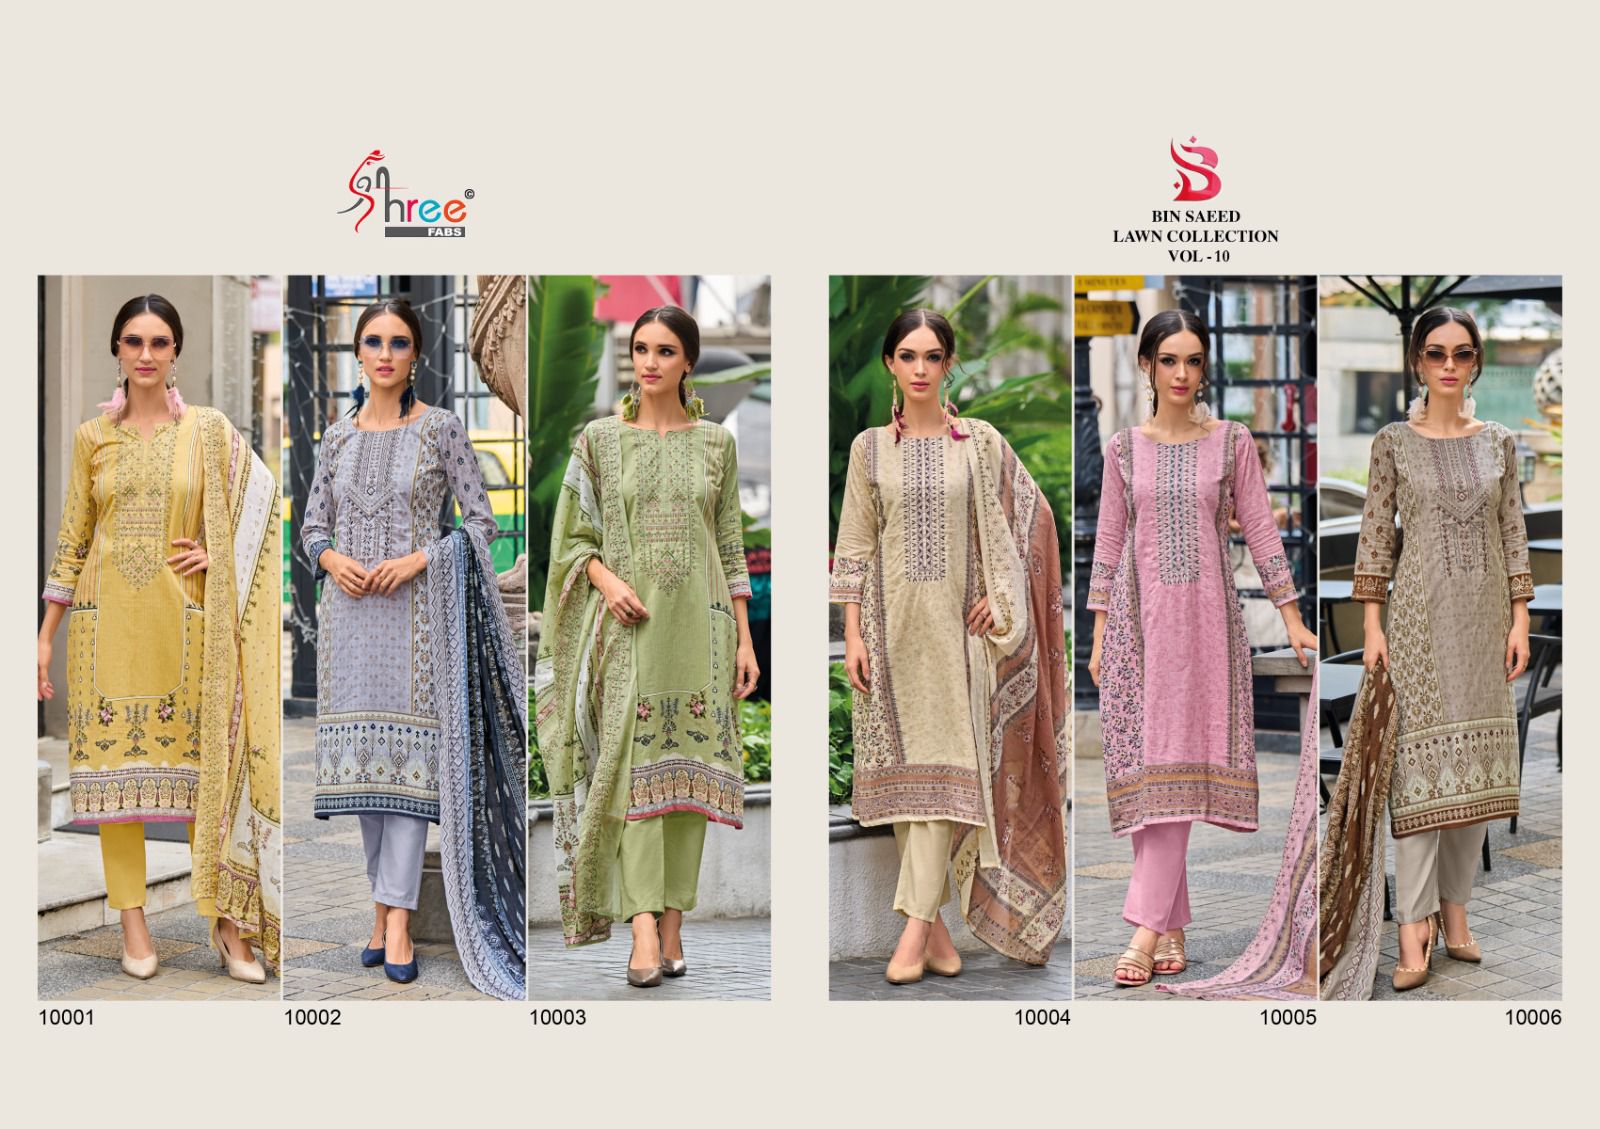 Shree Bin Saeed Lawn Collection Vol 10 collection 7